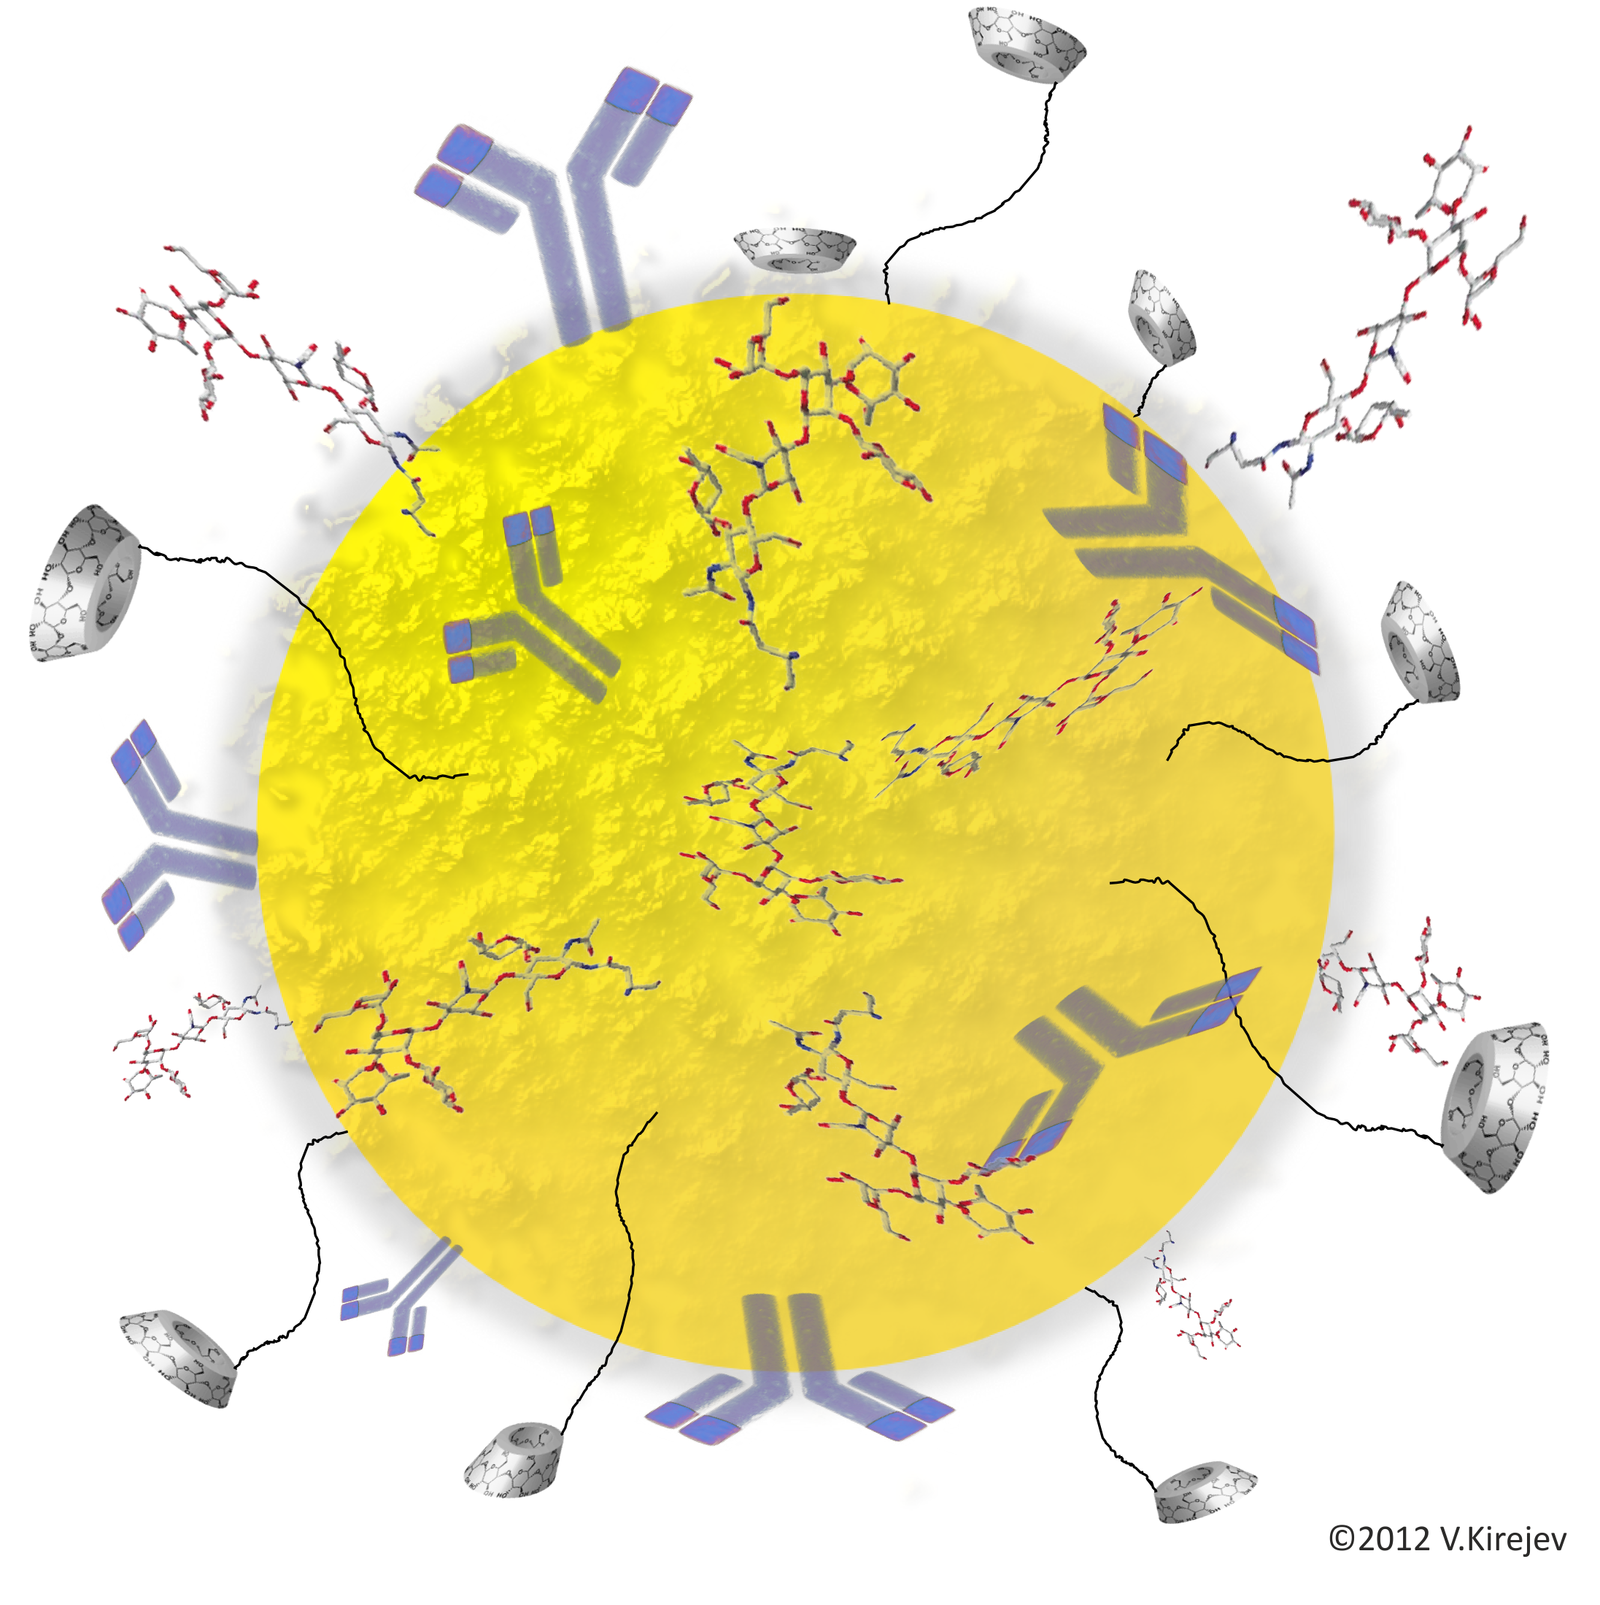 TSR&#x20;Functionalized&#x20;gold&#x20;nanoparticles